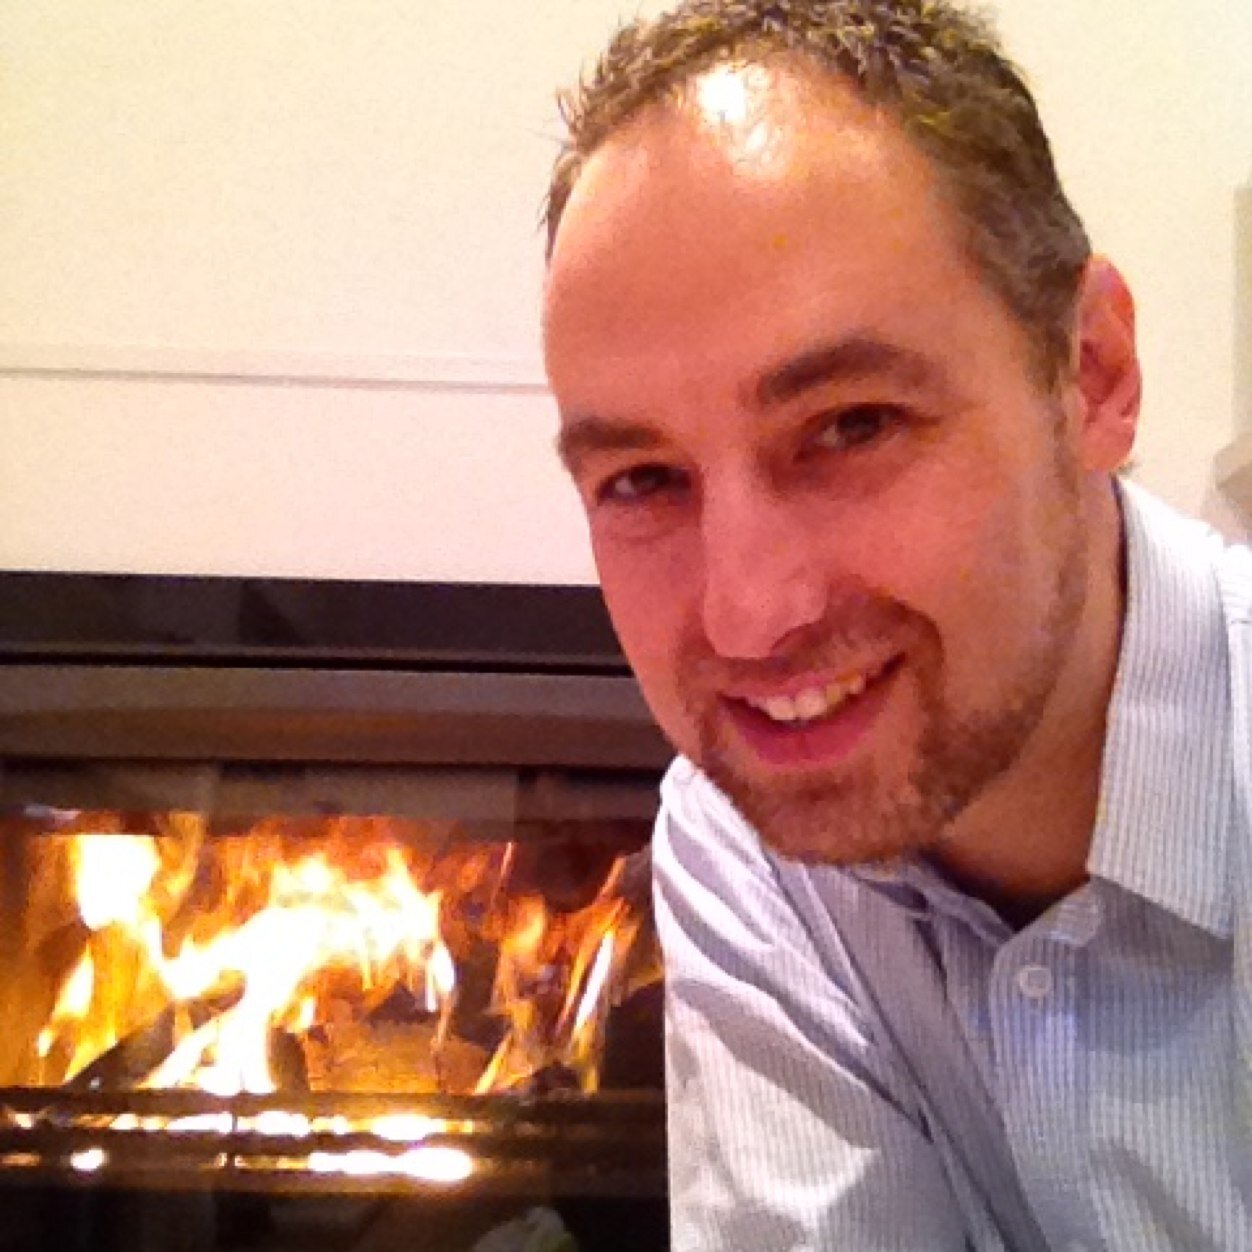 Managing Director of Charlton and Jenrick ltd. We design, develop and manufacture all kinds of useful and attractive domestic fireplace products in the UK.